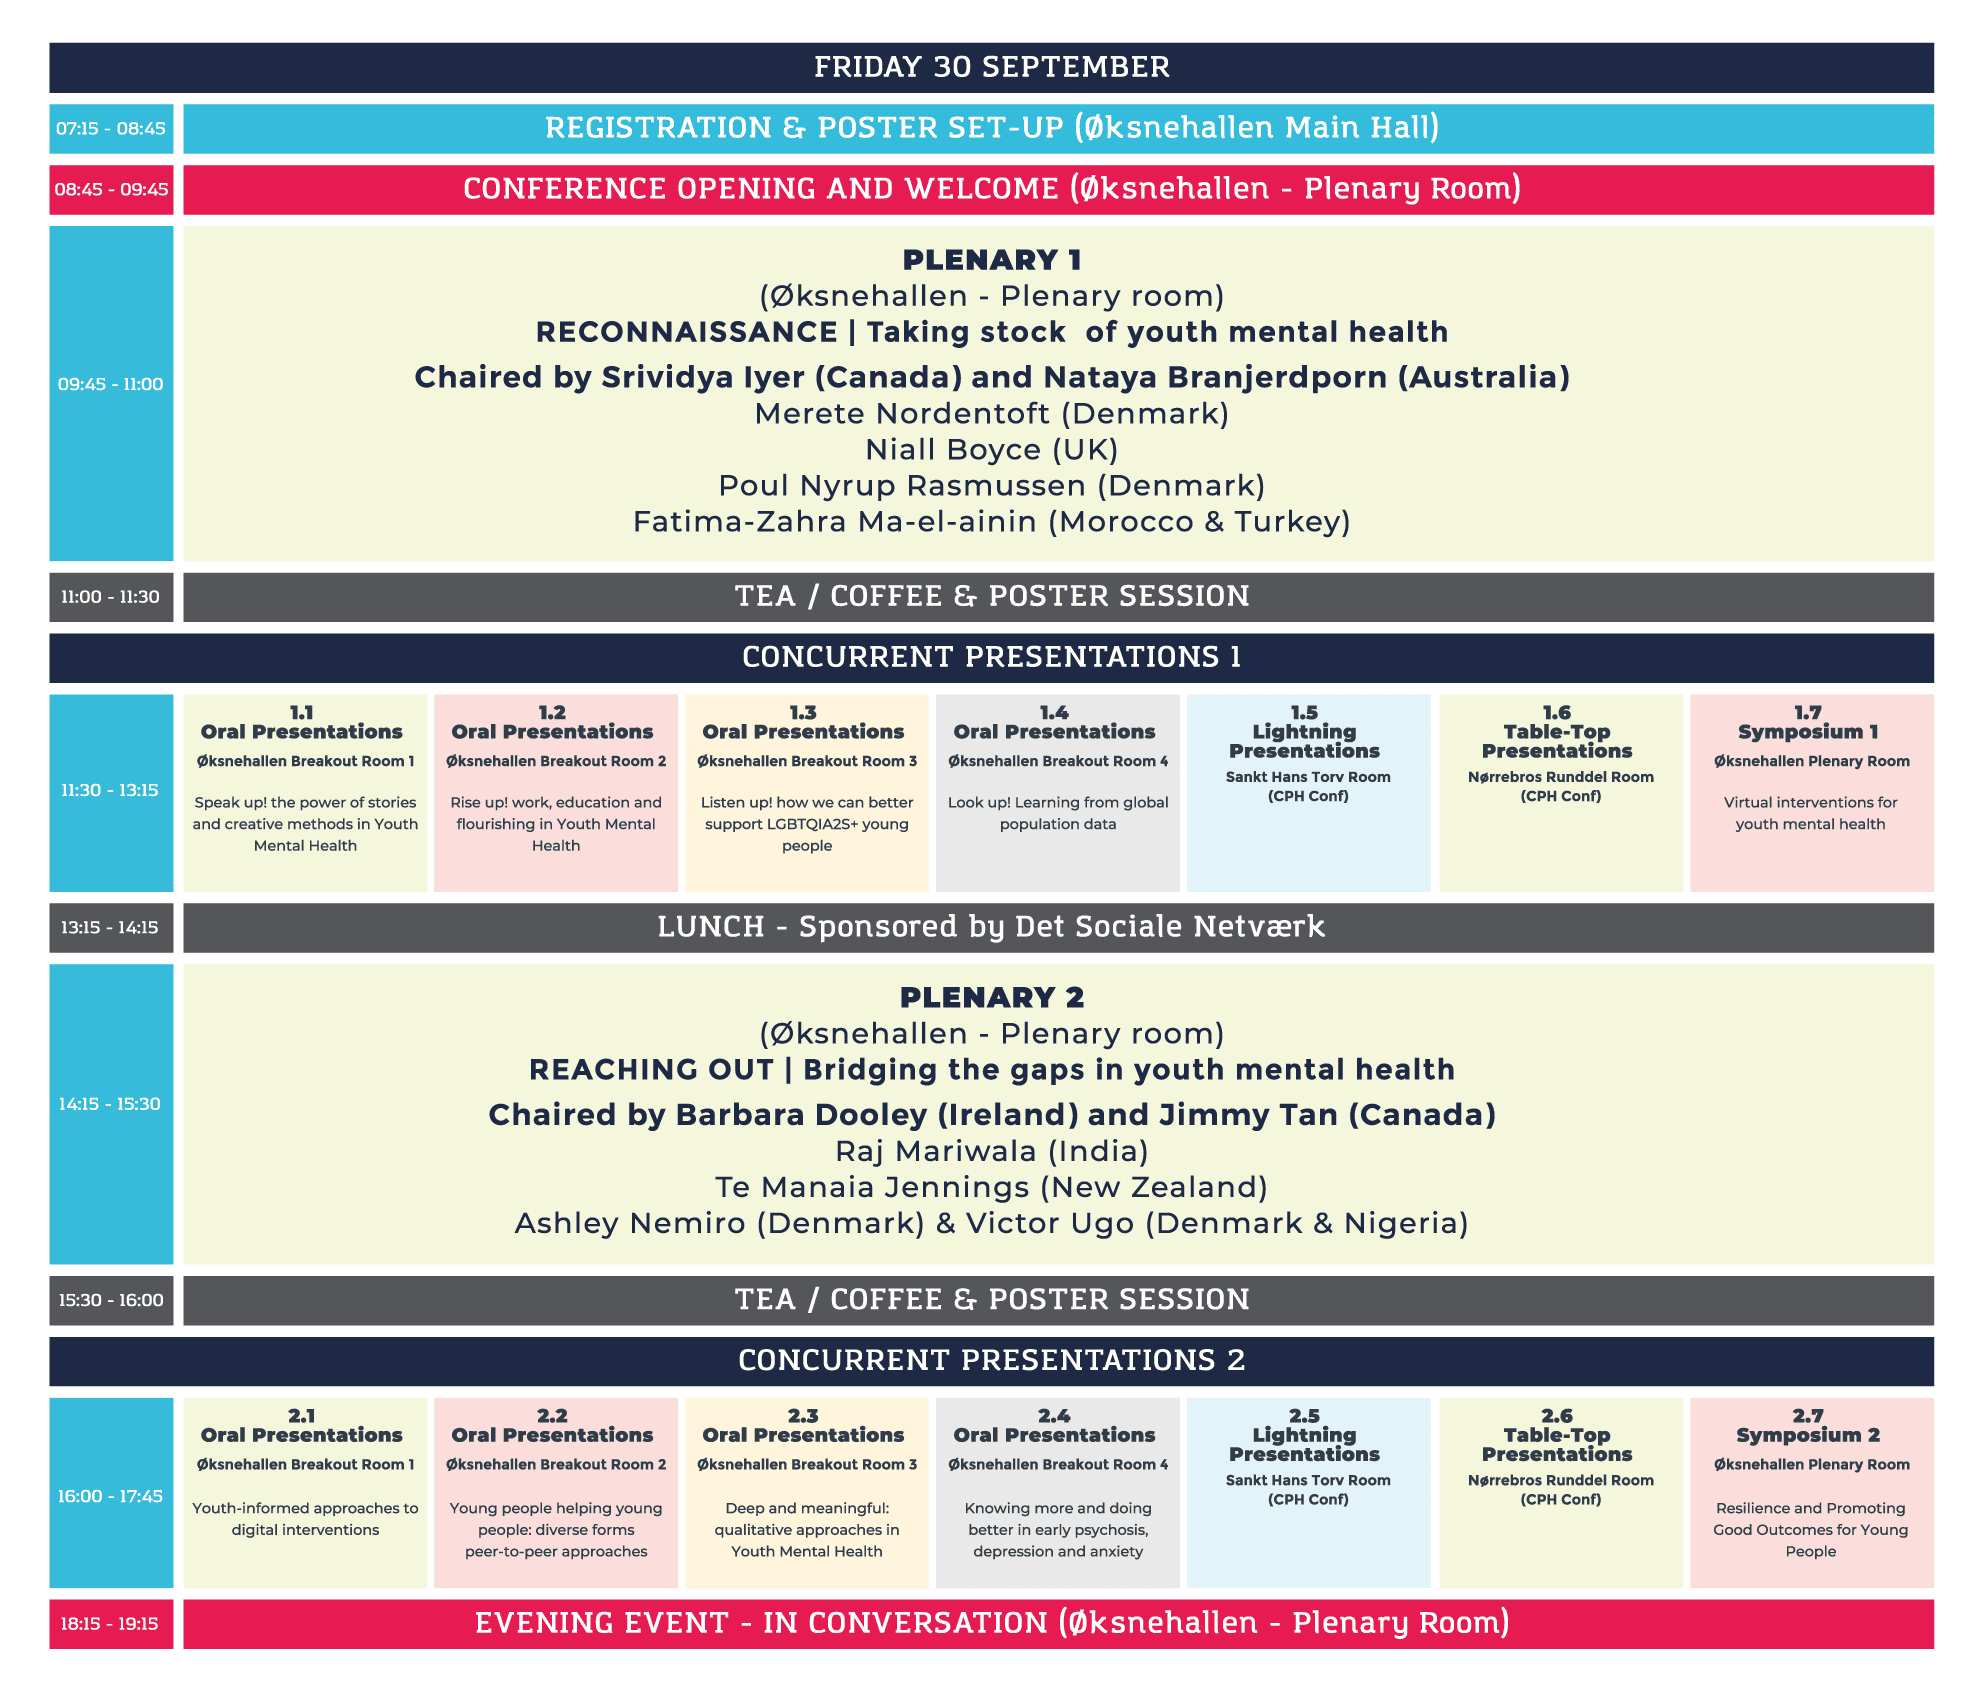 Programme Overview - Friday 30 Sept 2022